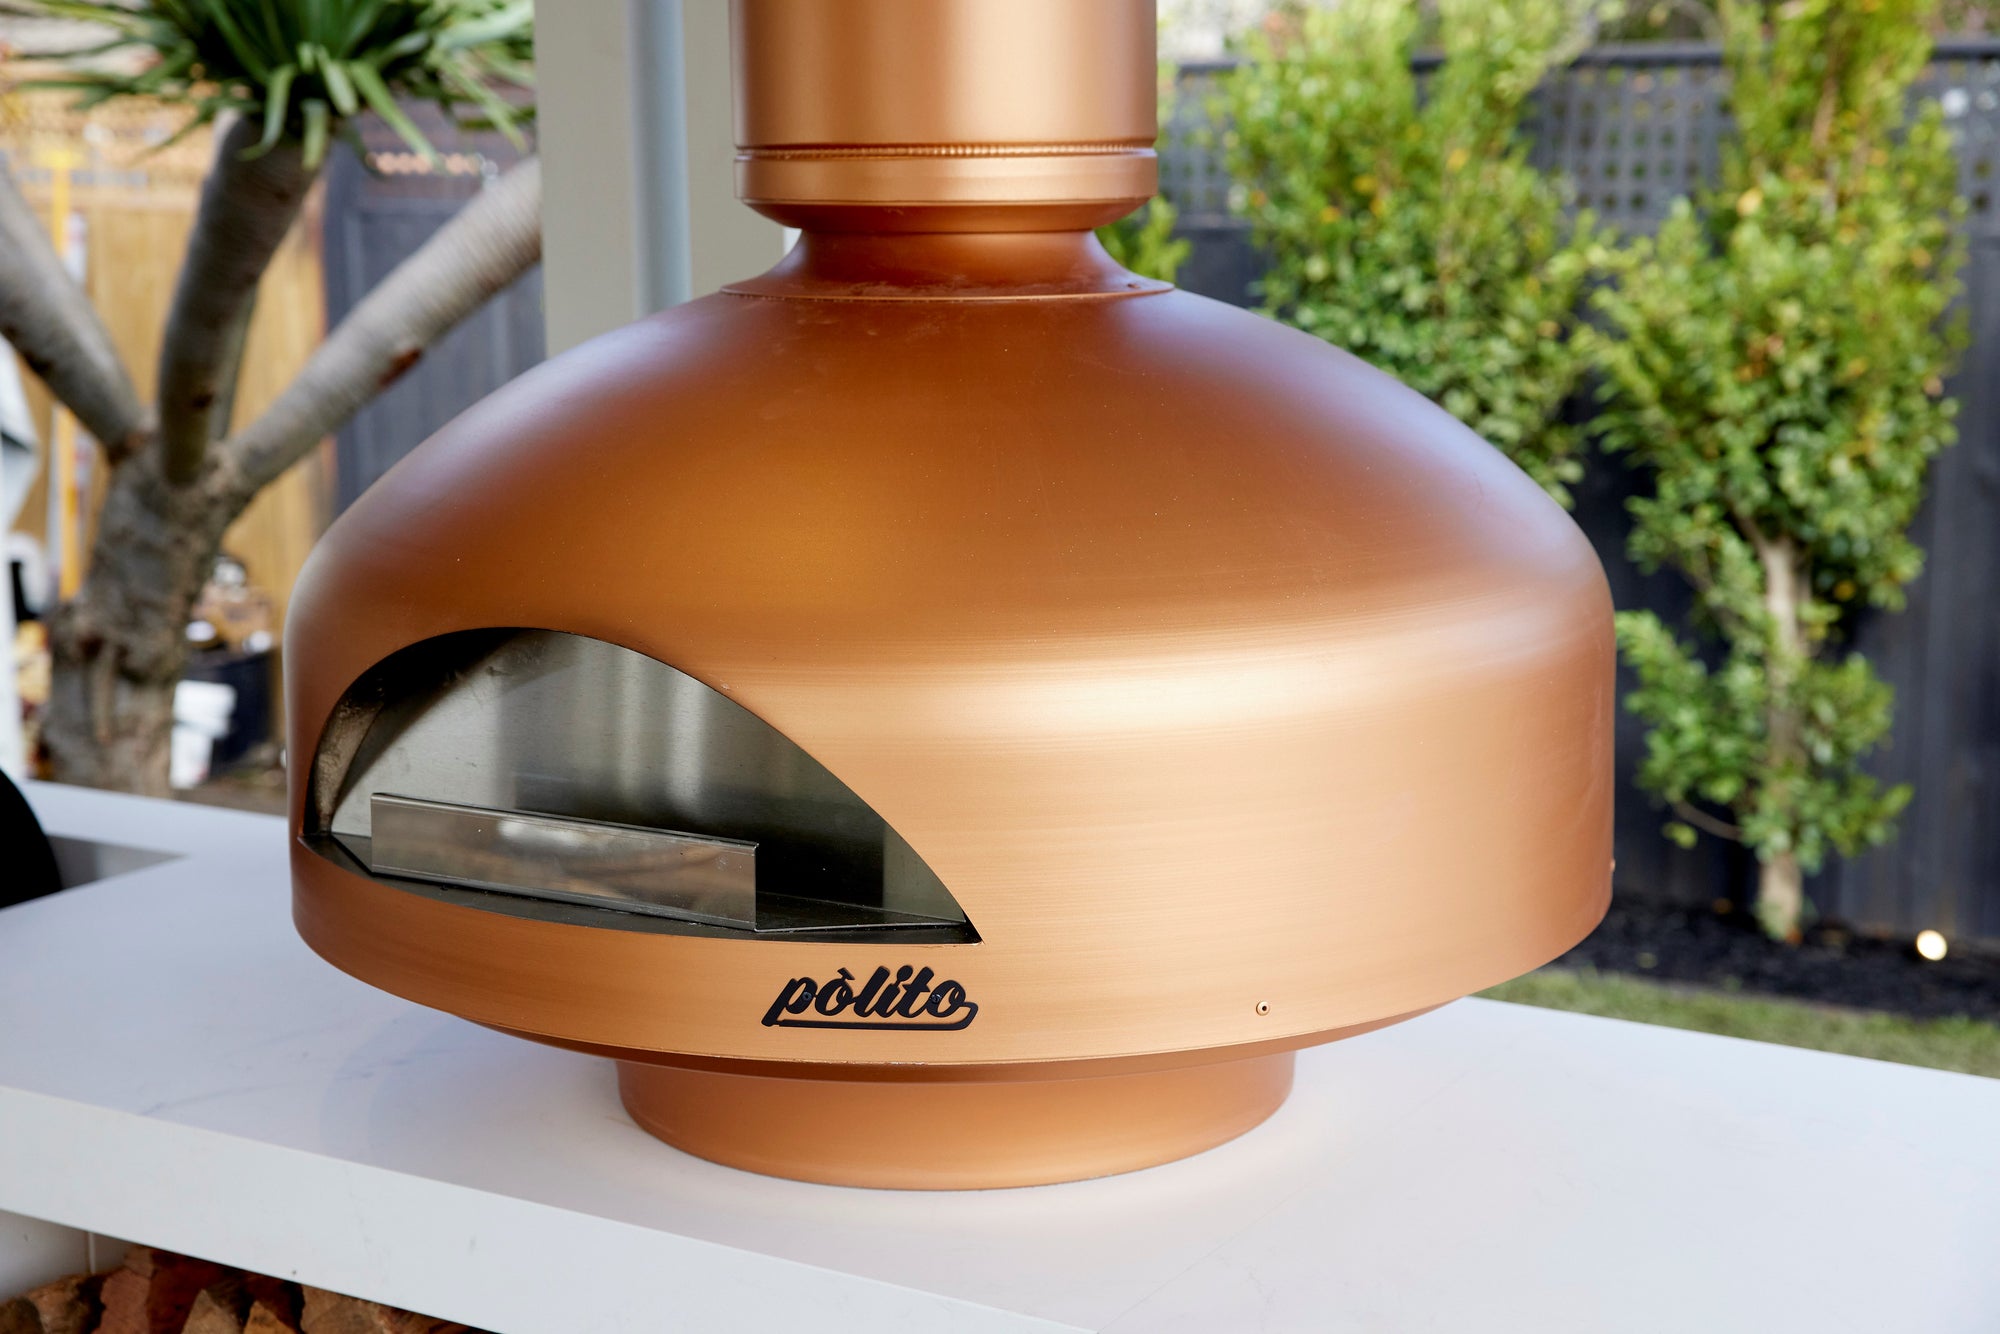 copper color polito giotto wood fired oven with benchstand at the block tv show